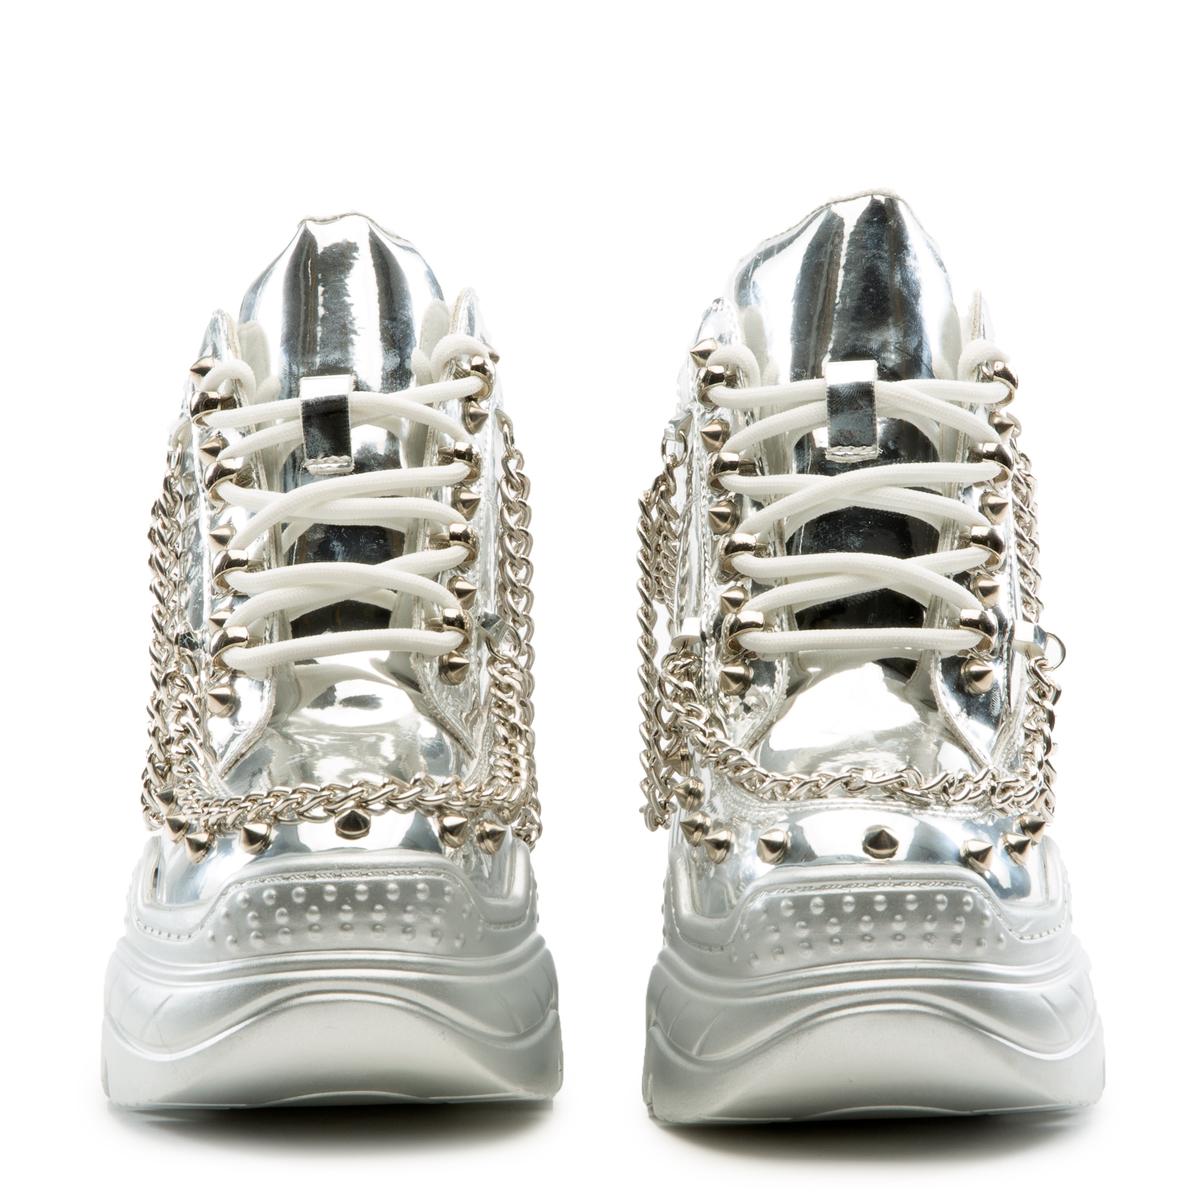 Space Candy Studded Wedge Sneaker